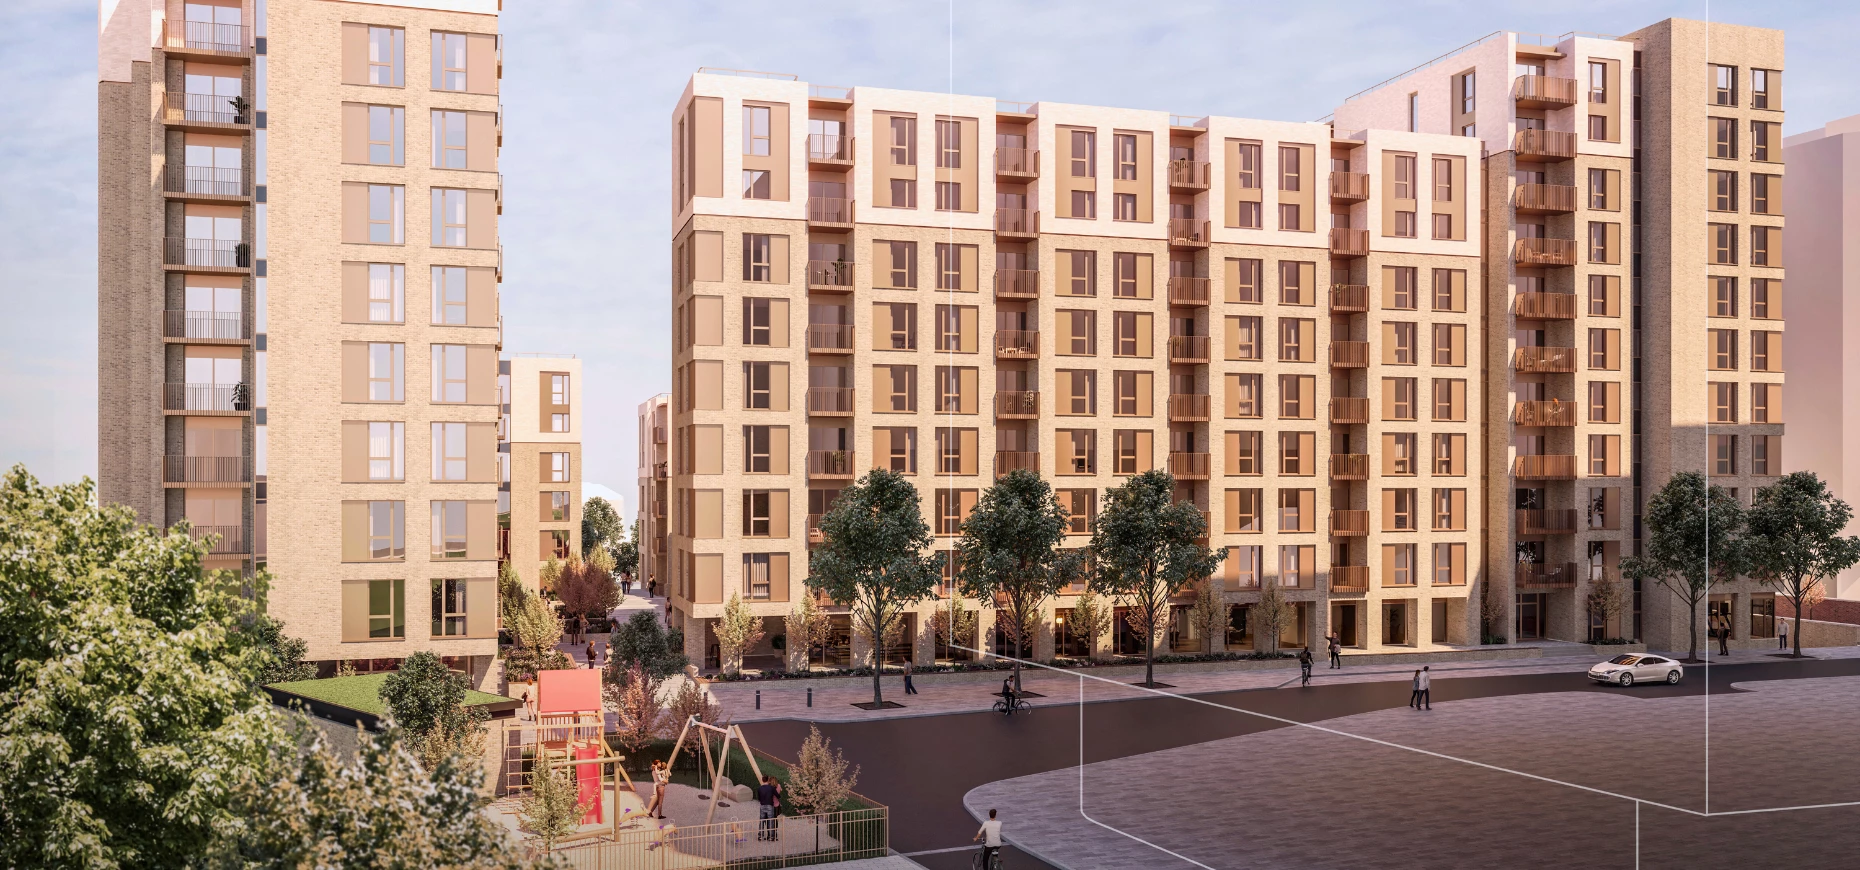 A CGI mock-up of what the new Renshaw’s Yard BTR development could look like.